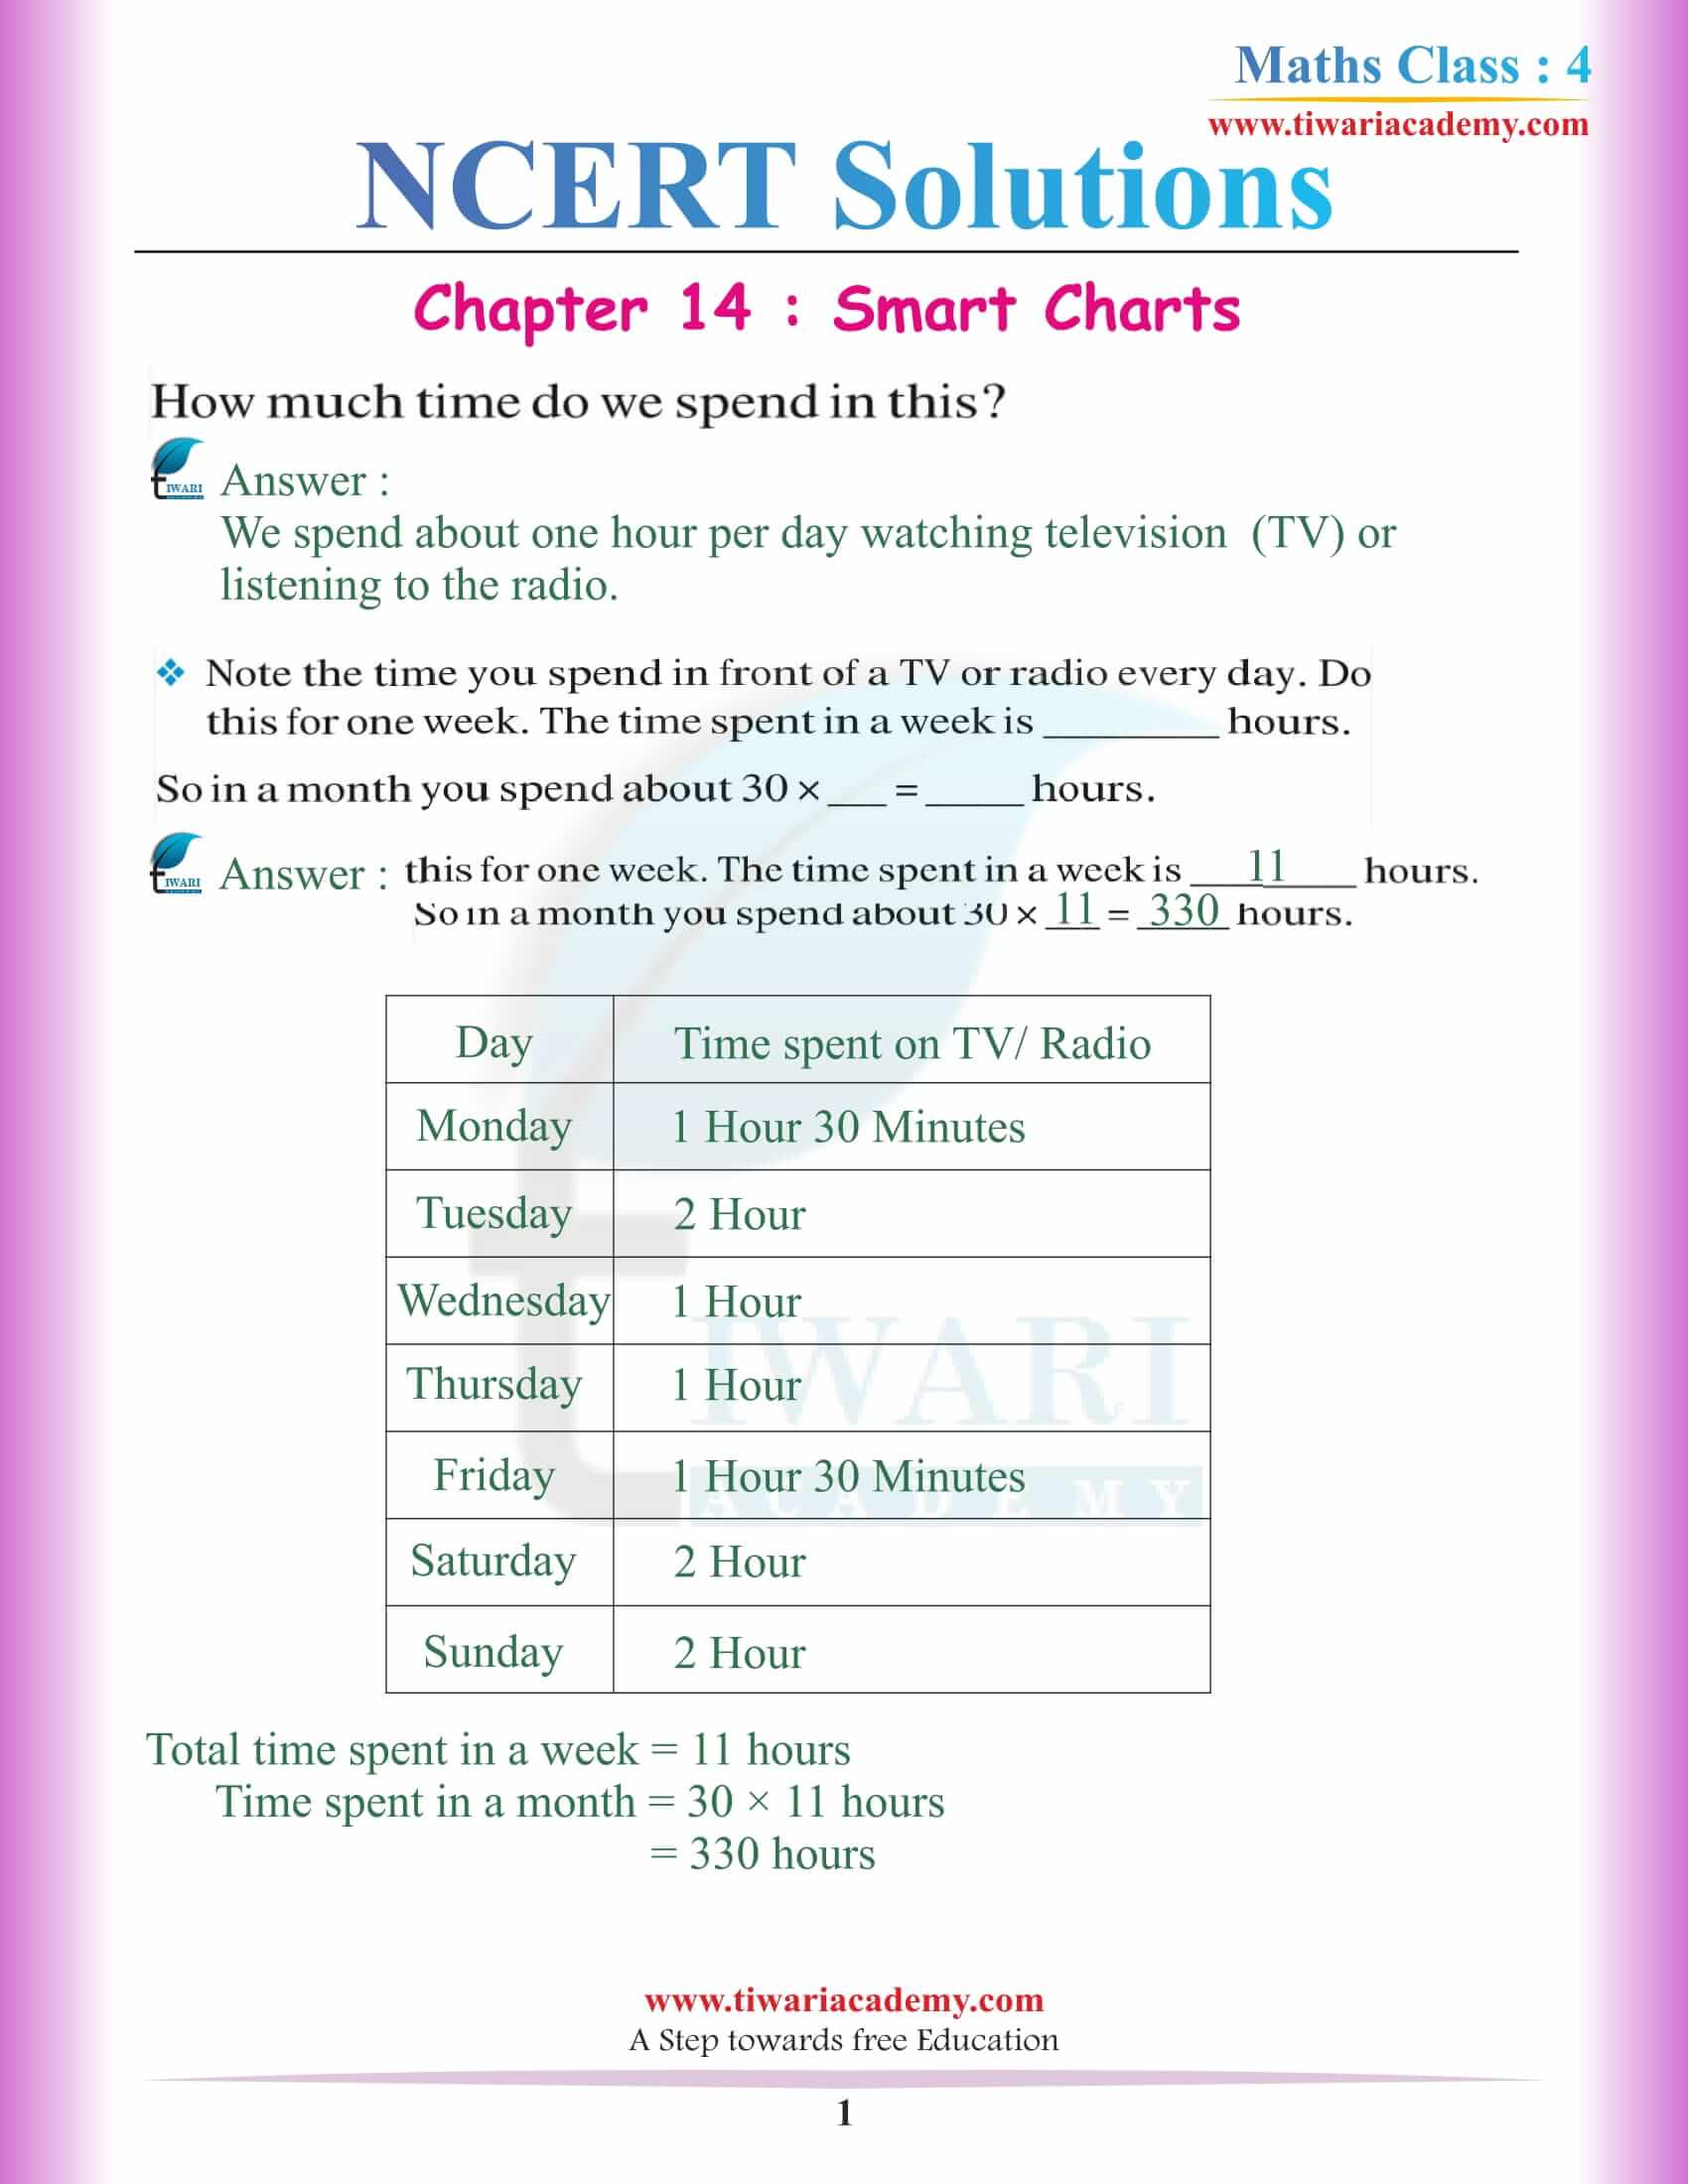 ncert-solutions-for-class-4-maths-chapter-14-in-hindi-english-medium